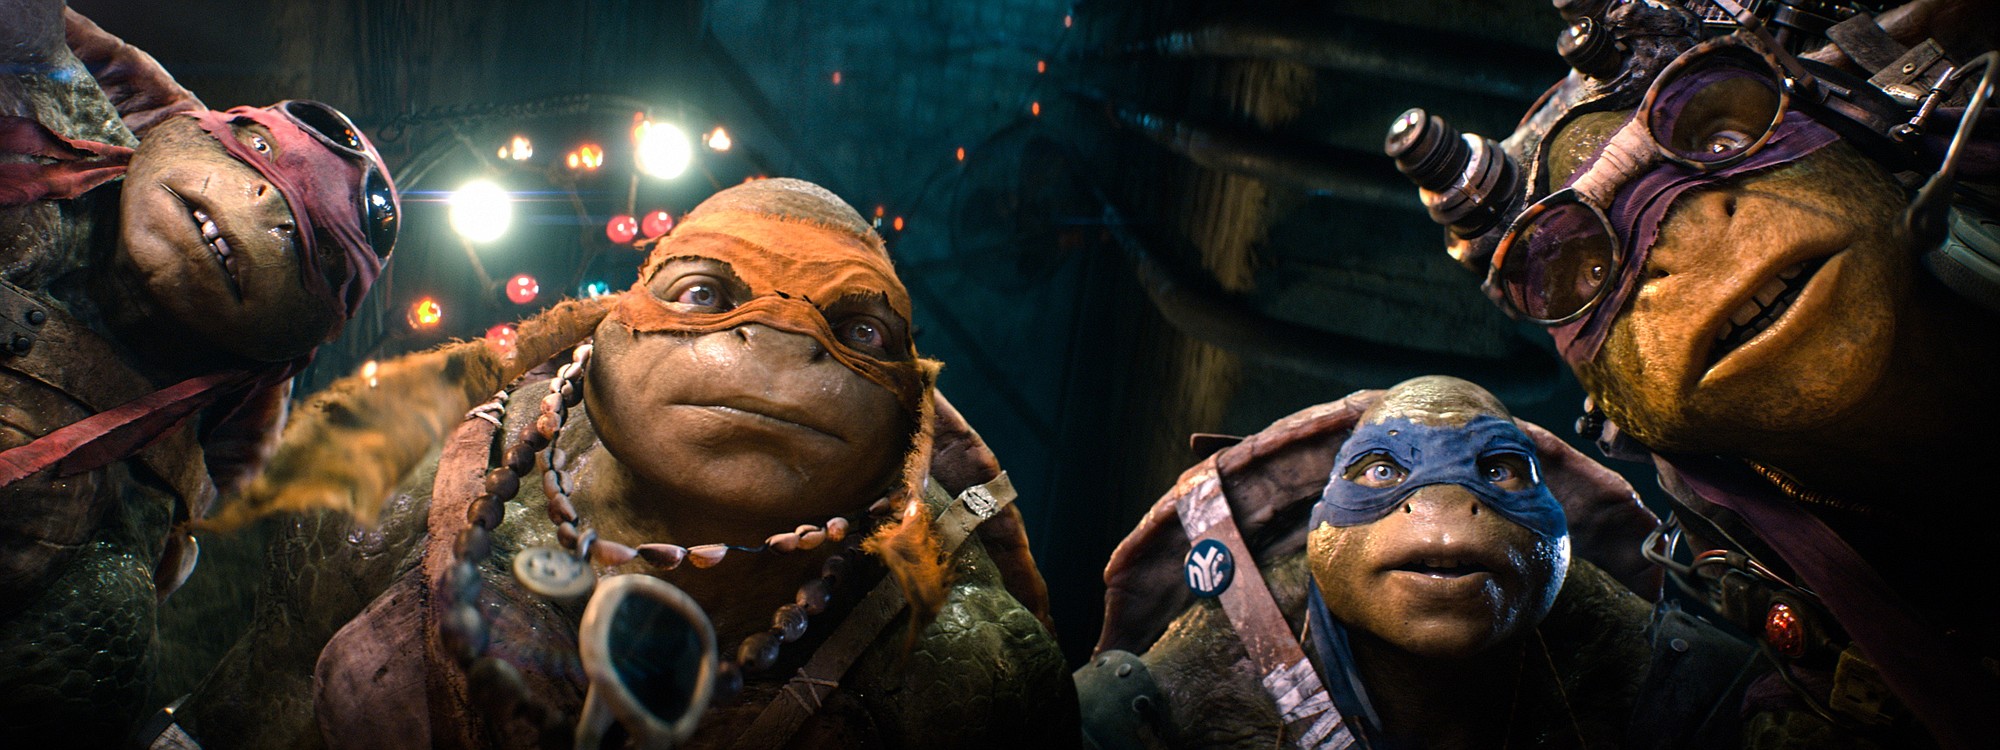 The 'Ninja Turtles' from A to Z - The Columbian